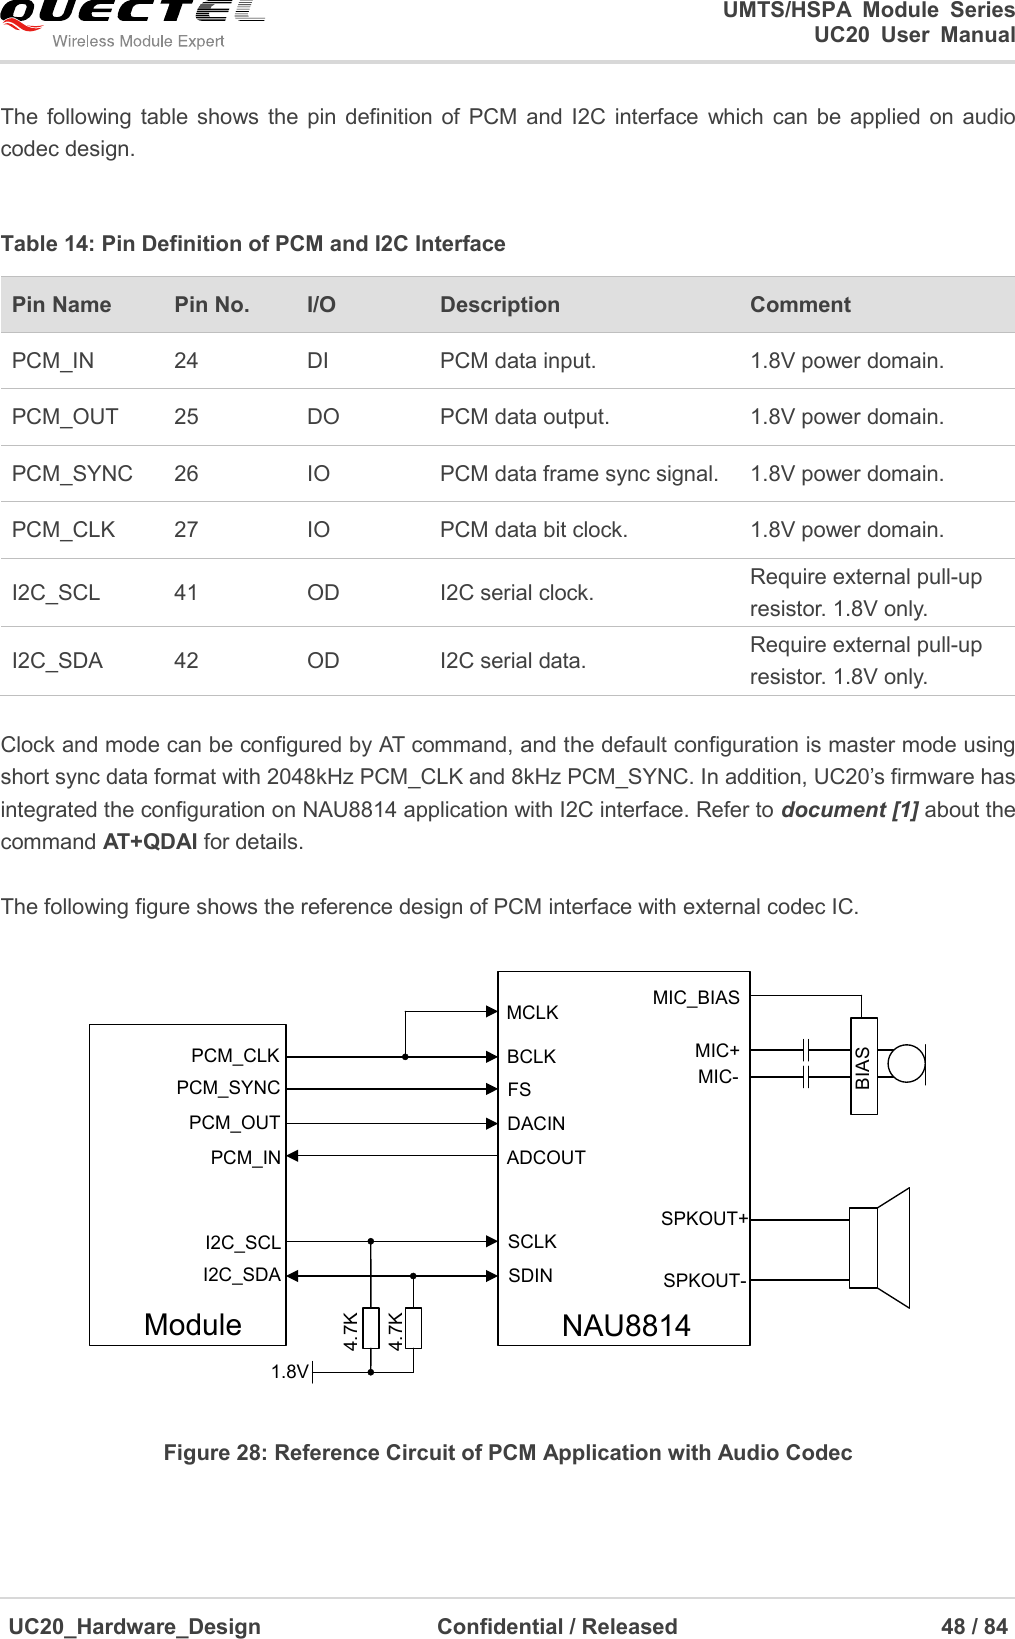                                                                                                                                               UMTS/HSPA  Module  Series                                                                 UC20  User  Manual  UC20_Hardware_Design                  Confidential / Released                            48 / 84     The  following  table  shows  the pin  definition of  PCM  and  I2C  interface  which  can  be  applied  on  audio codec design.  Table 14: Pin Definition of PCM and I2C Interface Pin Name   Pin No. I/O Description   Comment PCM_IN 24 DI PCM data input. 1.8V power domain. PCM_OUT 25 DO PCM data output. 1.8V power domain. PCM_SYNC 26 IO PCM data frame sync signal. 1.8V power domain. PCM_CLK 27 IO PCM data bit clock. 1.8V power domain. I2C_SCL 41 OD I2C serial clock. Require external pull-up resistor. 1.8V only. I2C_SDA 42 OD I2C serial data. Require external pull-up resistor. 1.8V only.  Clock and mode can be configured by AT command, and the default configuration is master mode using short sync data format with 2048kHz PCM_CLK and 8kHz PCM_SYNC. In addition, UC20’s firmware has integrated the configuration on NAU8814 application with I2C interface. Refer to document [1] about the command AT+QDAI for details.  The following figure shows the reference design of PCM interface with external codec IC. PCM_INPCM_OUTPCM_SYNCPCM_CLKI2C_SCLI2C_SDANAU8814Module1.8V4.7K4.7KBCLKMCLKFSDACINADCOUTSCLKSDINBIASMIC_BIASMIC+MIC-SPKOUT+SPKOUT- Figure 28: Reference Circuit of PCM Application with Audio Codec   